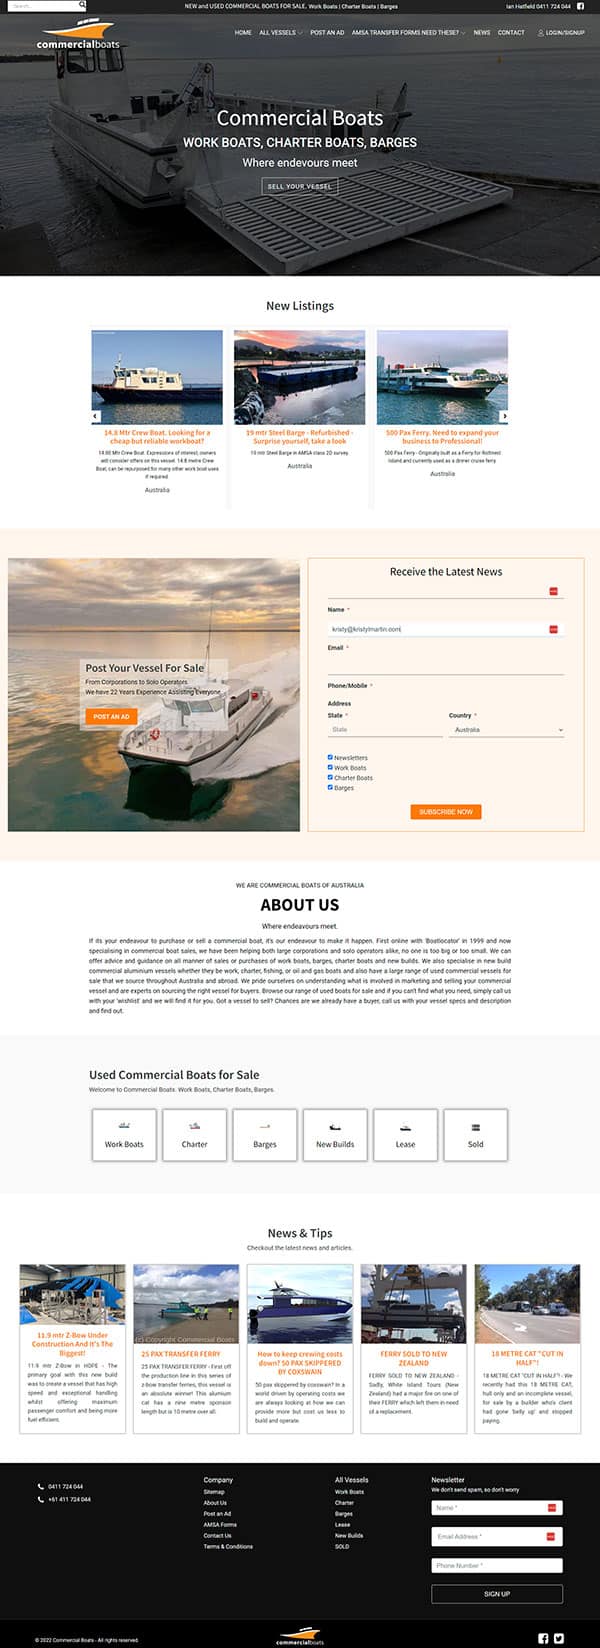 Commercial Boats Australia Home Page